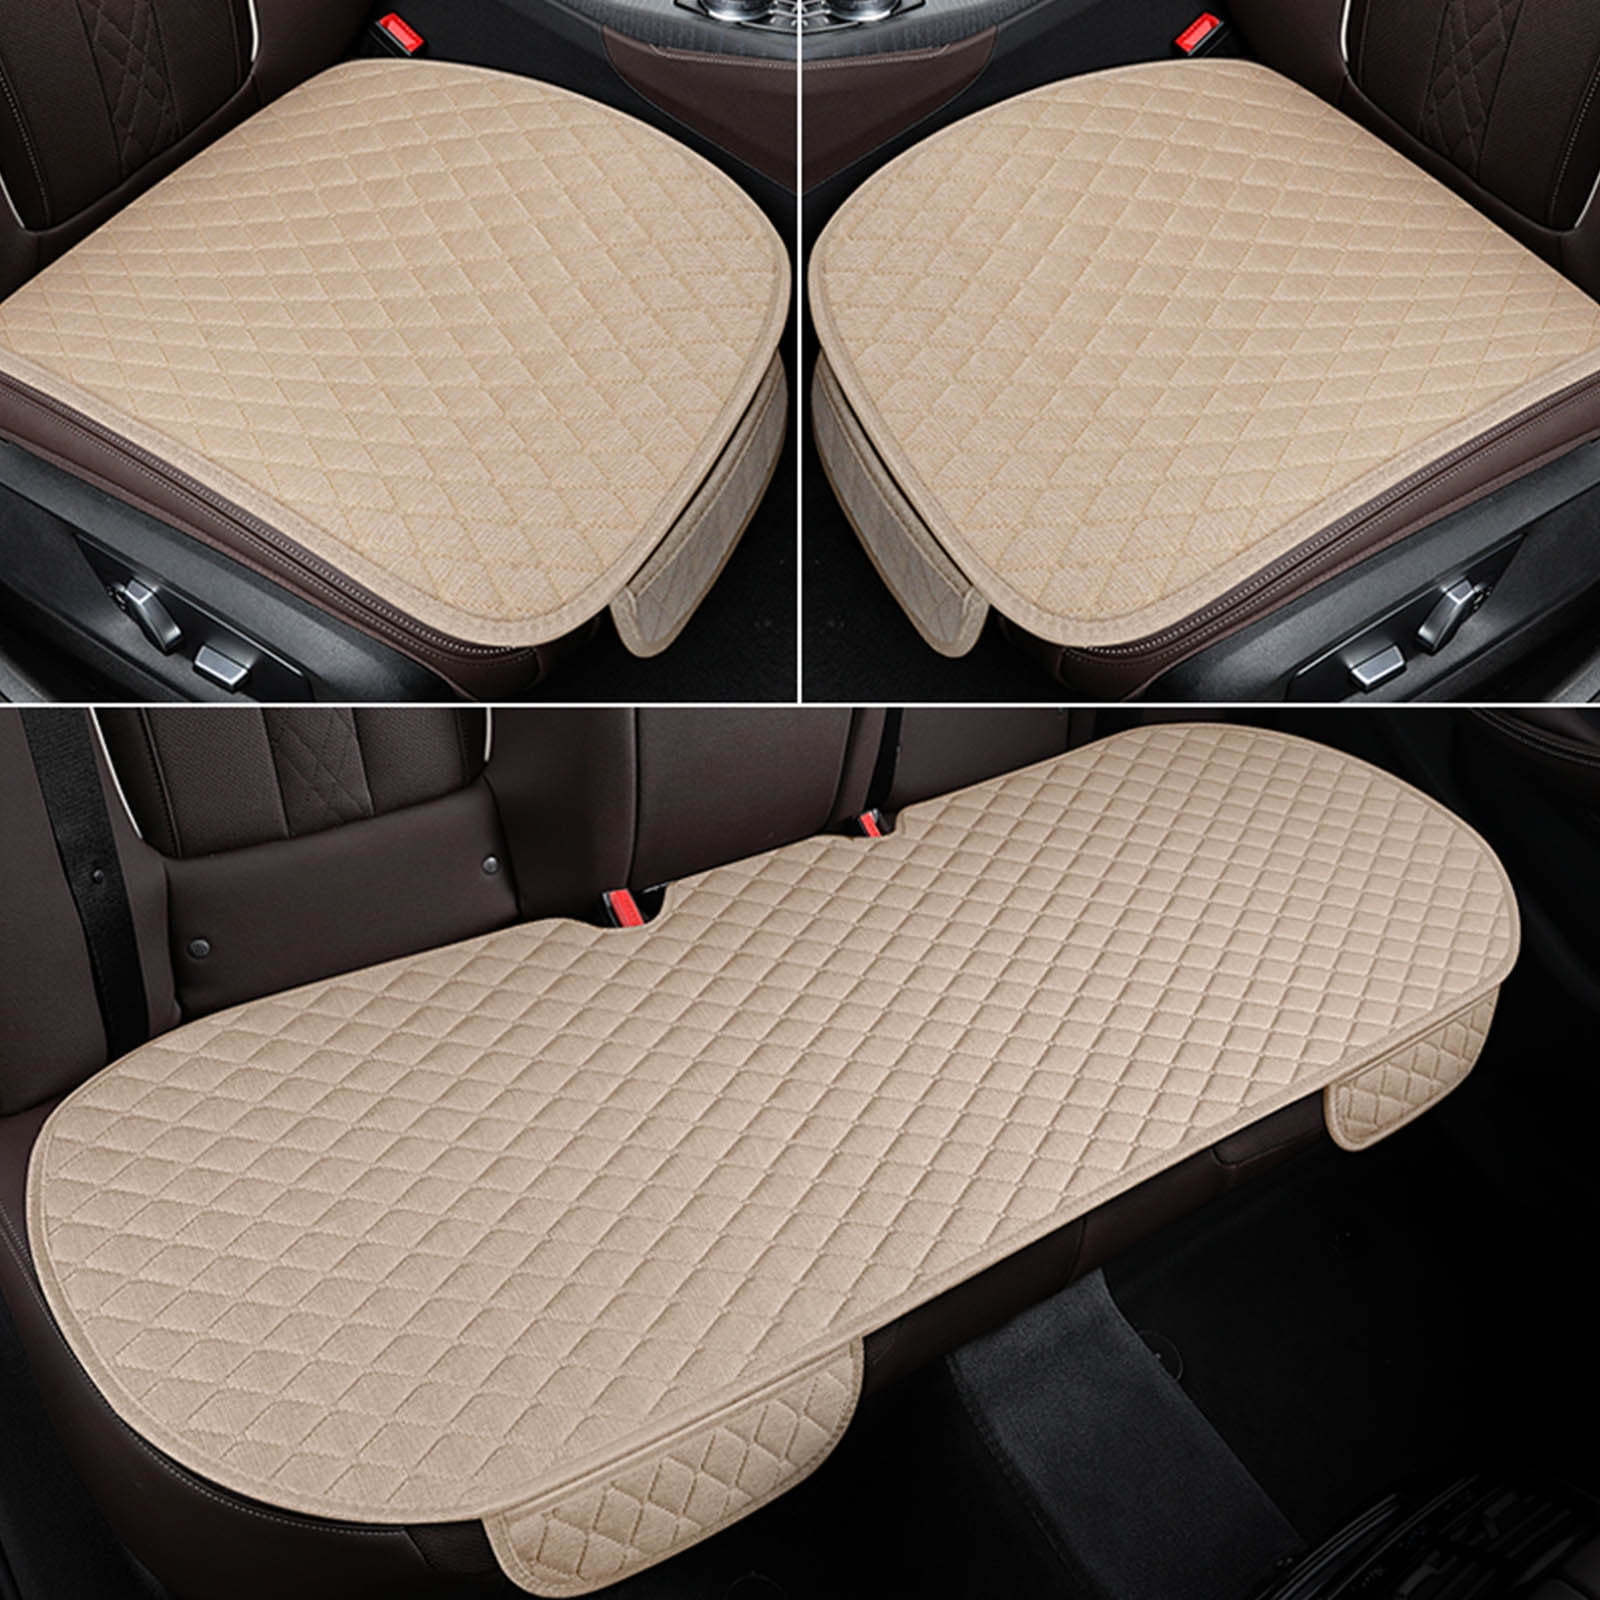 Pack of 3 Car Seat Cushions, Universal Linen Seat Covers, Non-Slip